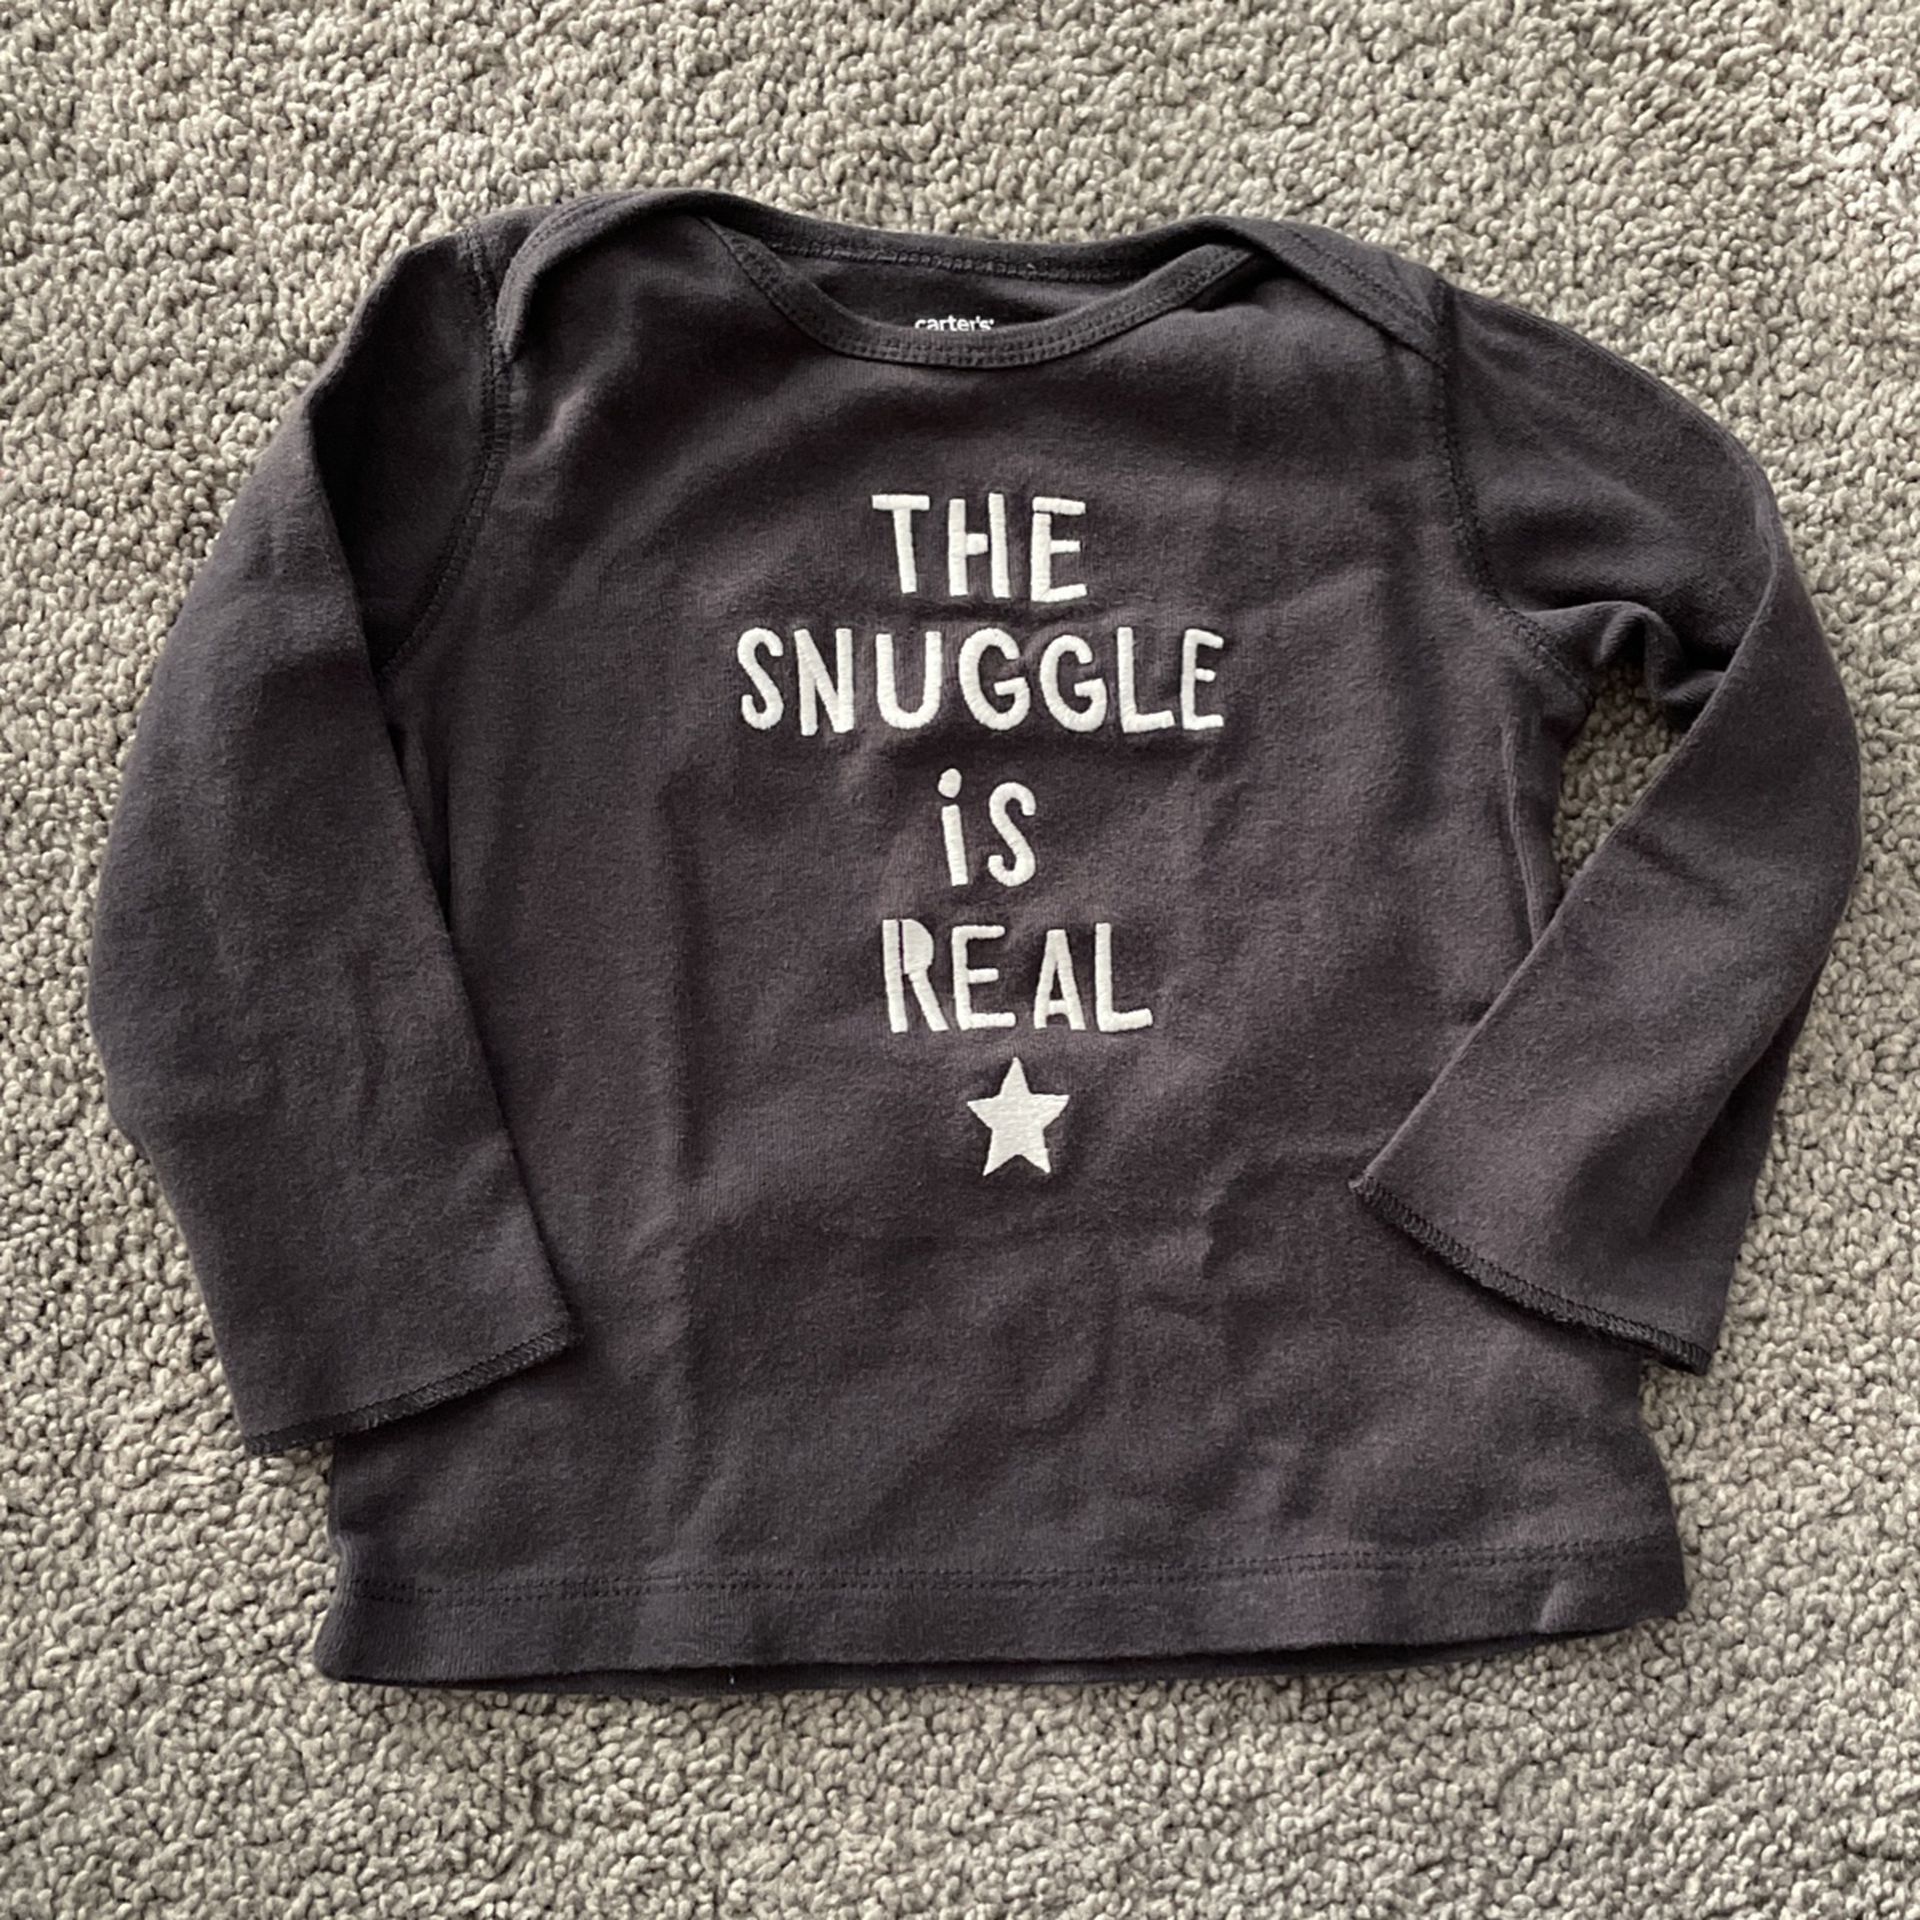 “The Snuggle Is Real” Shirt 18M